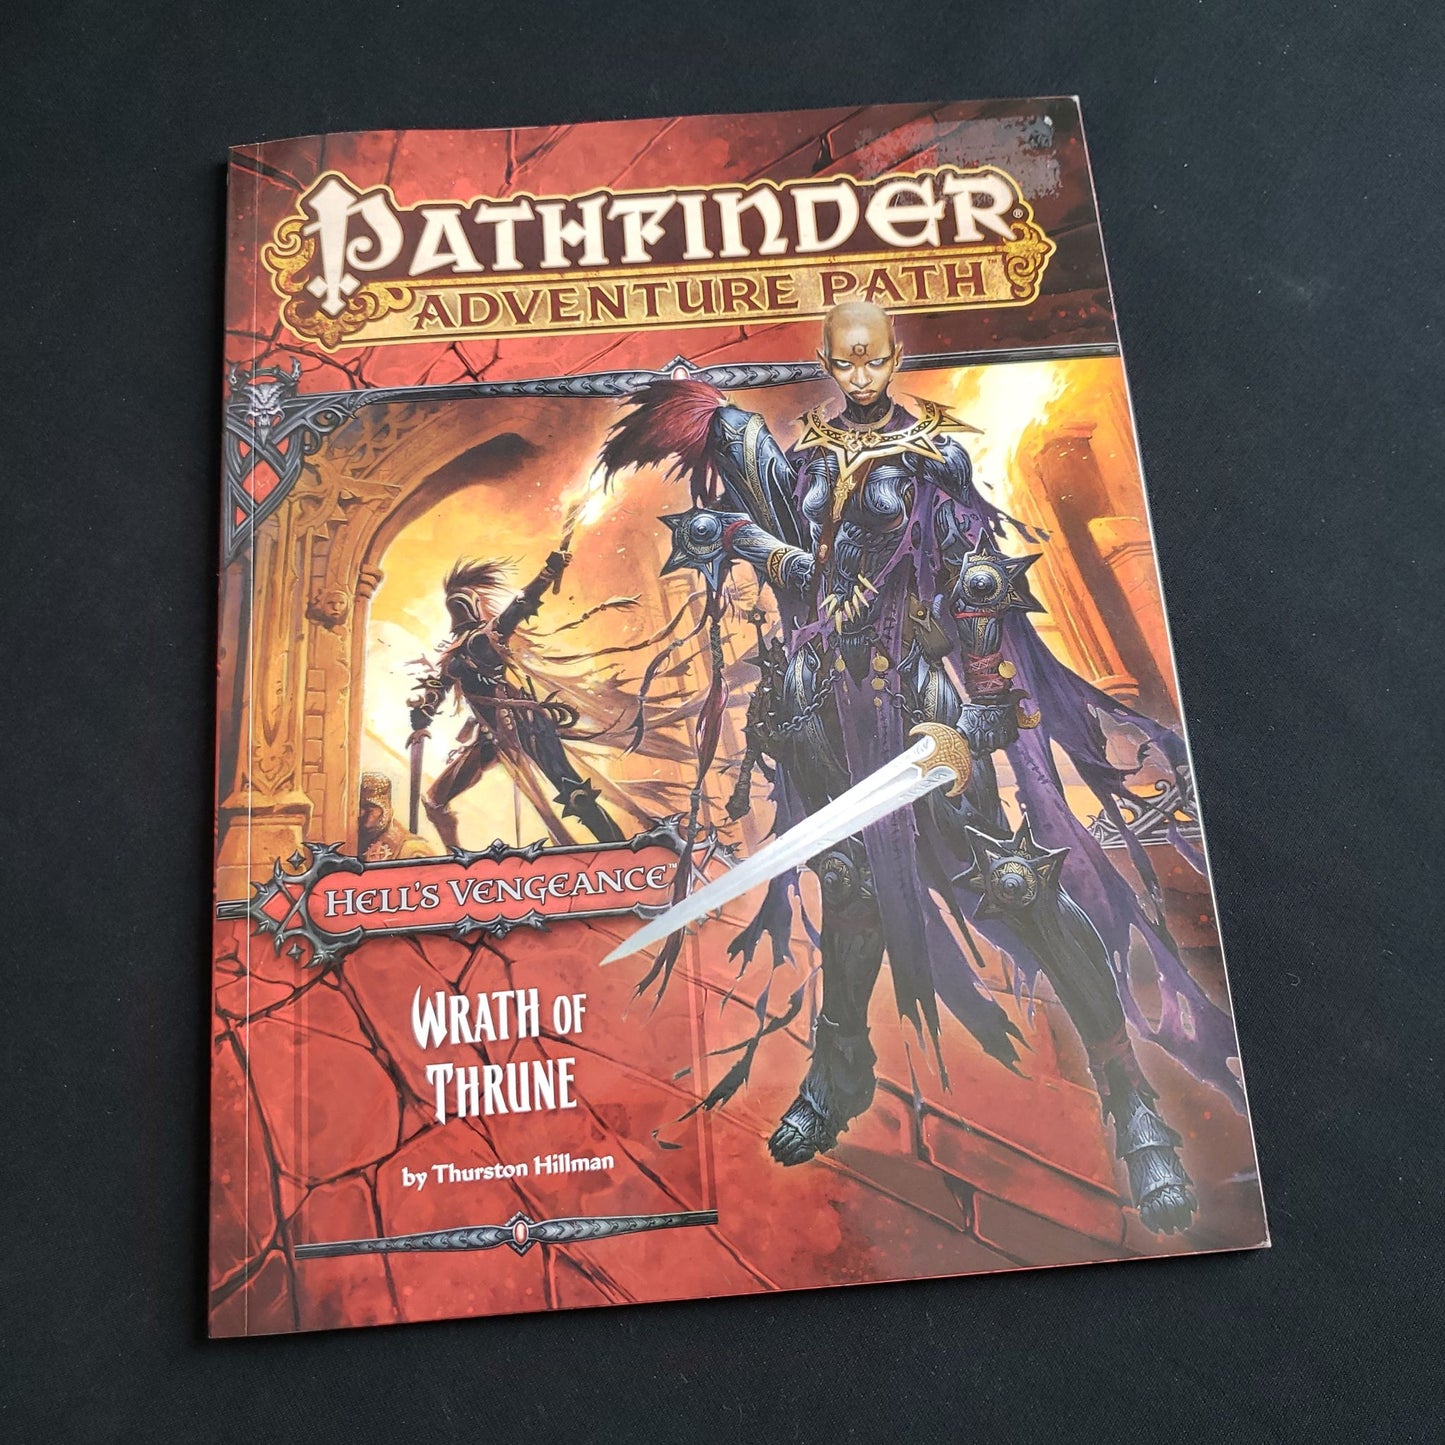 Pathfinder First Edition roleplaying game - front cover of Wrath of Thrune book